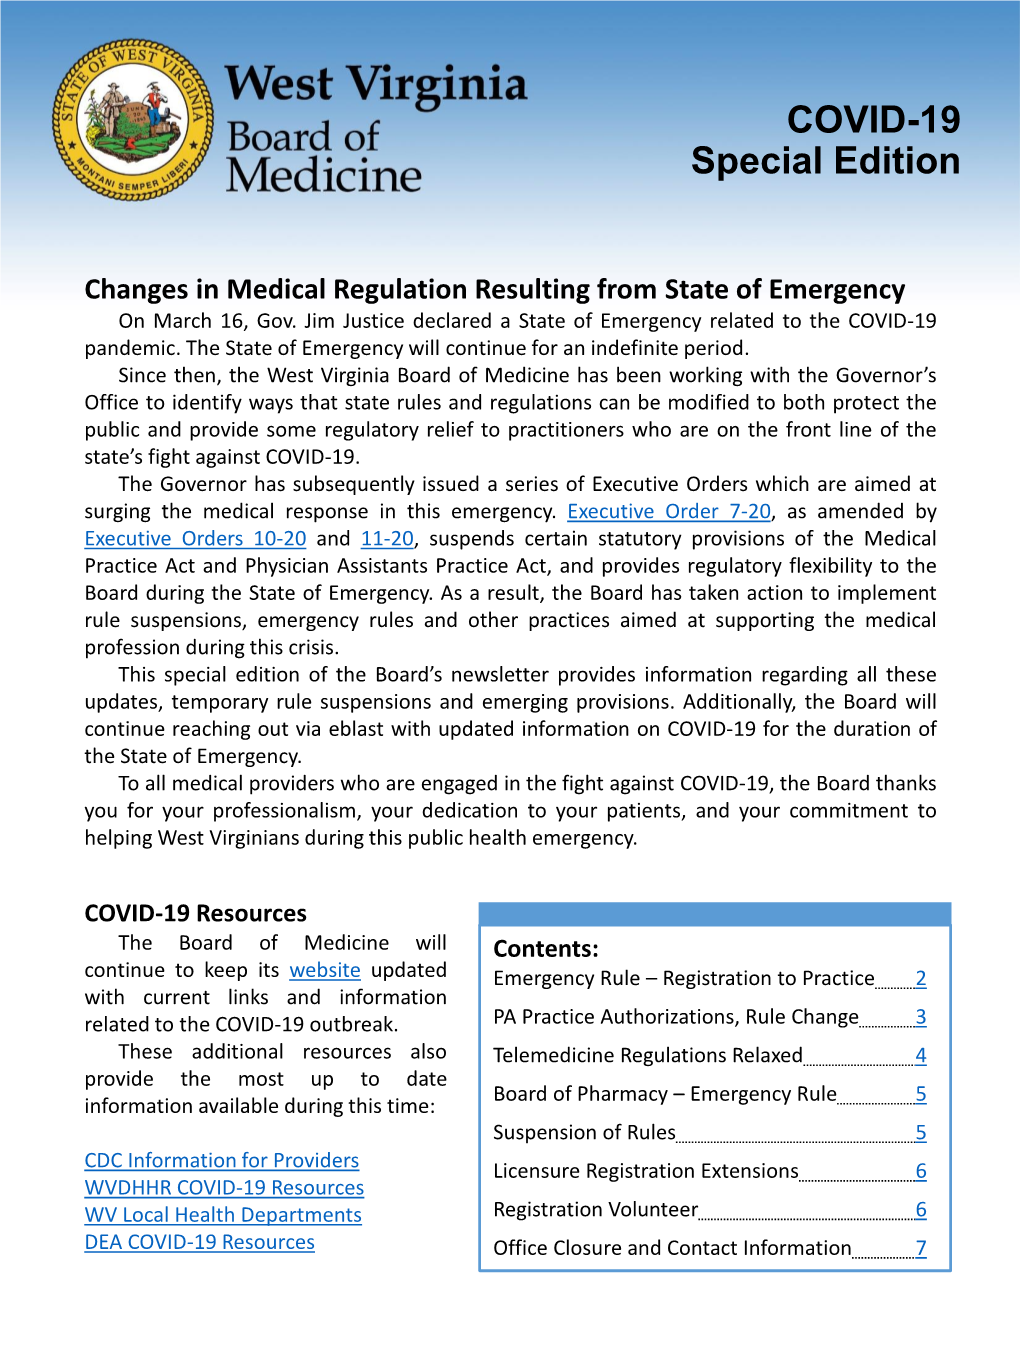 West Virginia Board of Medicine COVID-19 Special Edition Newsletter